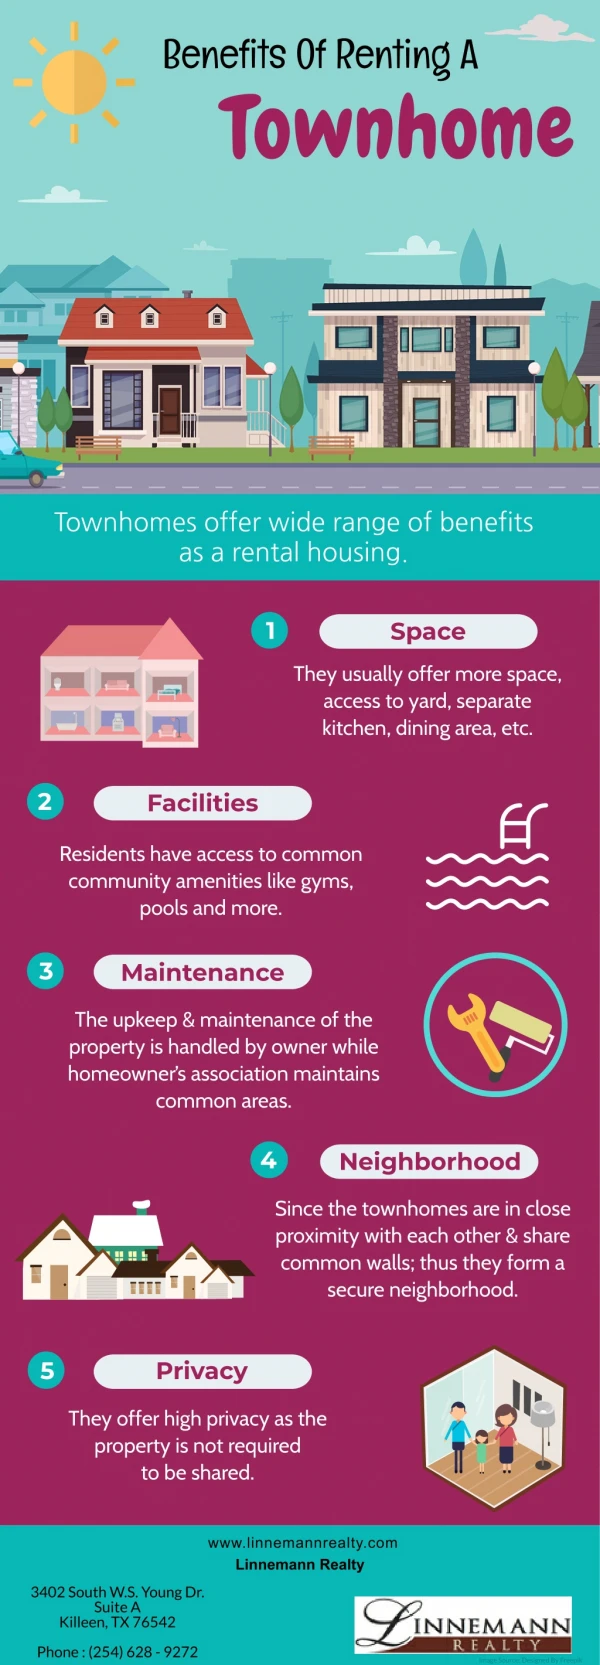 Benefits Of Renting A Townhome